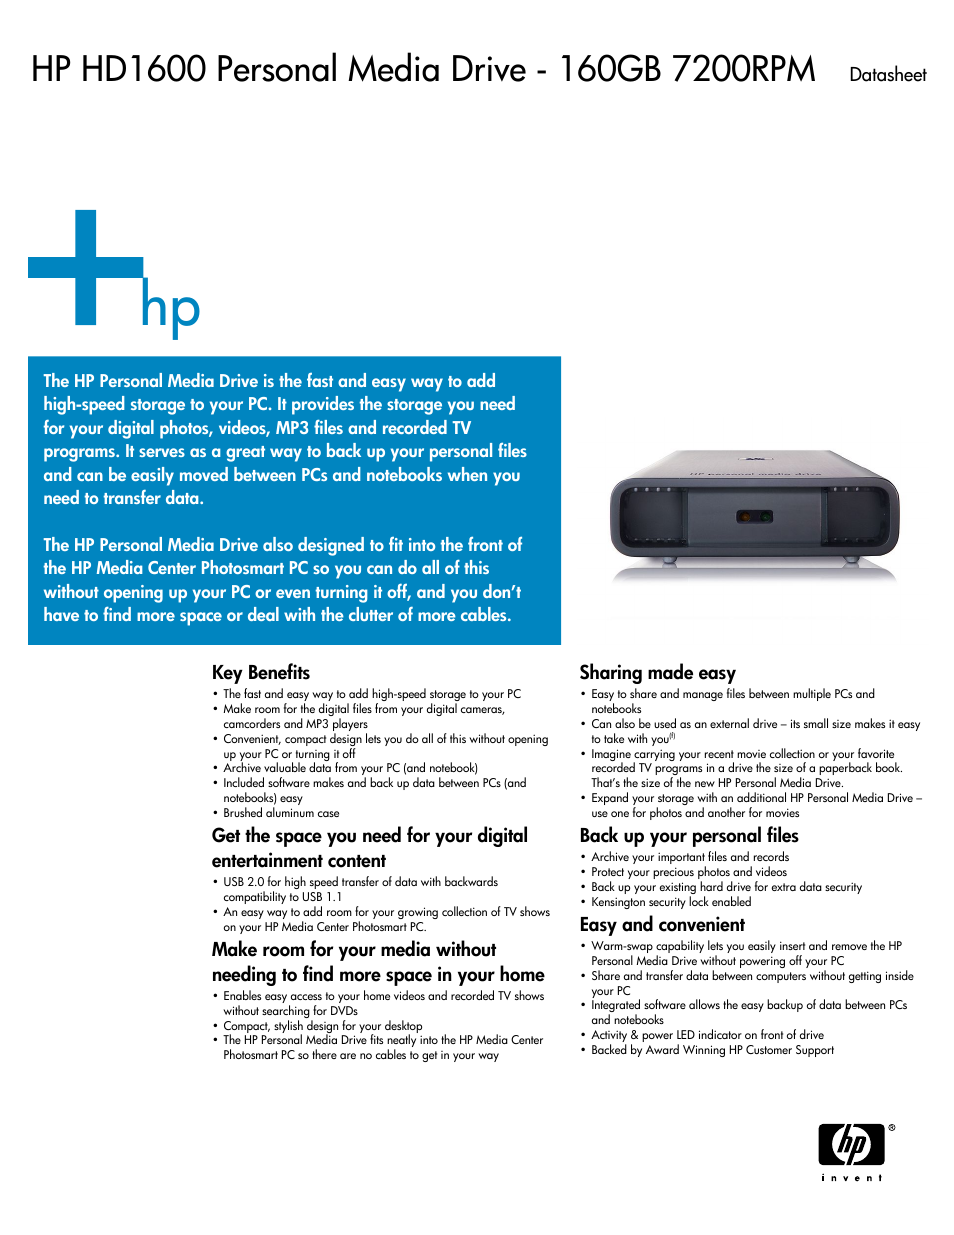 HD1600 (Page 1)